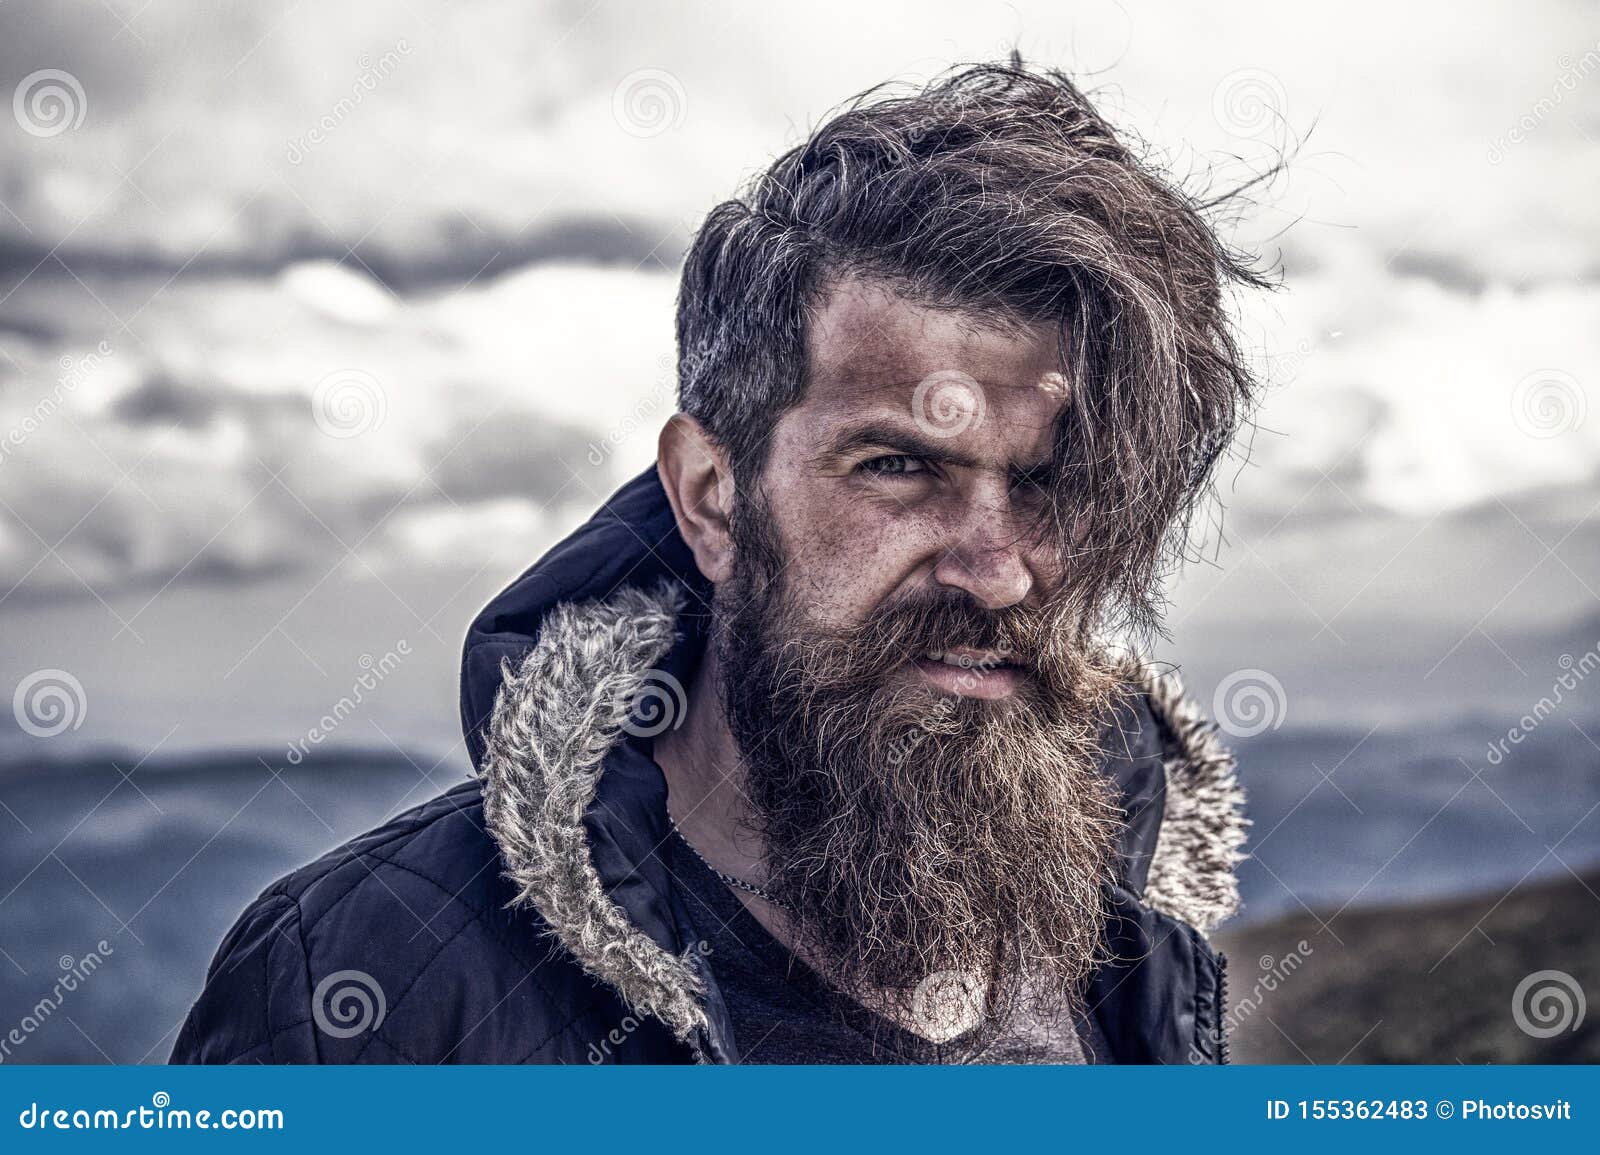 Man with Brutal Bearded Appearance, Brutal Unshaven Man Looks Untidy ...